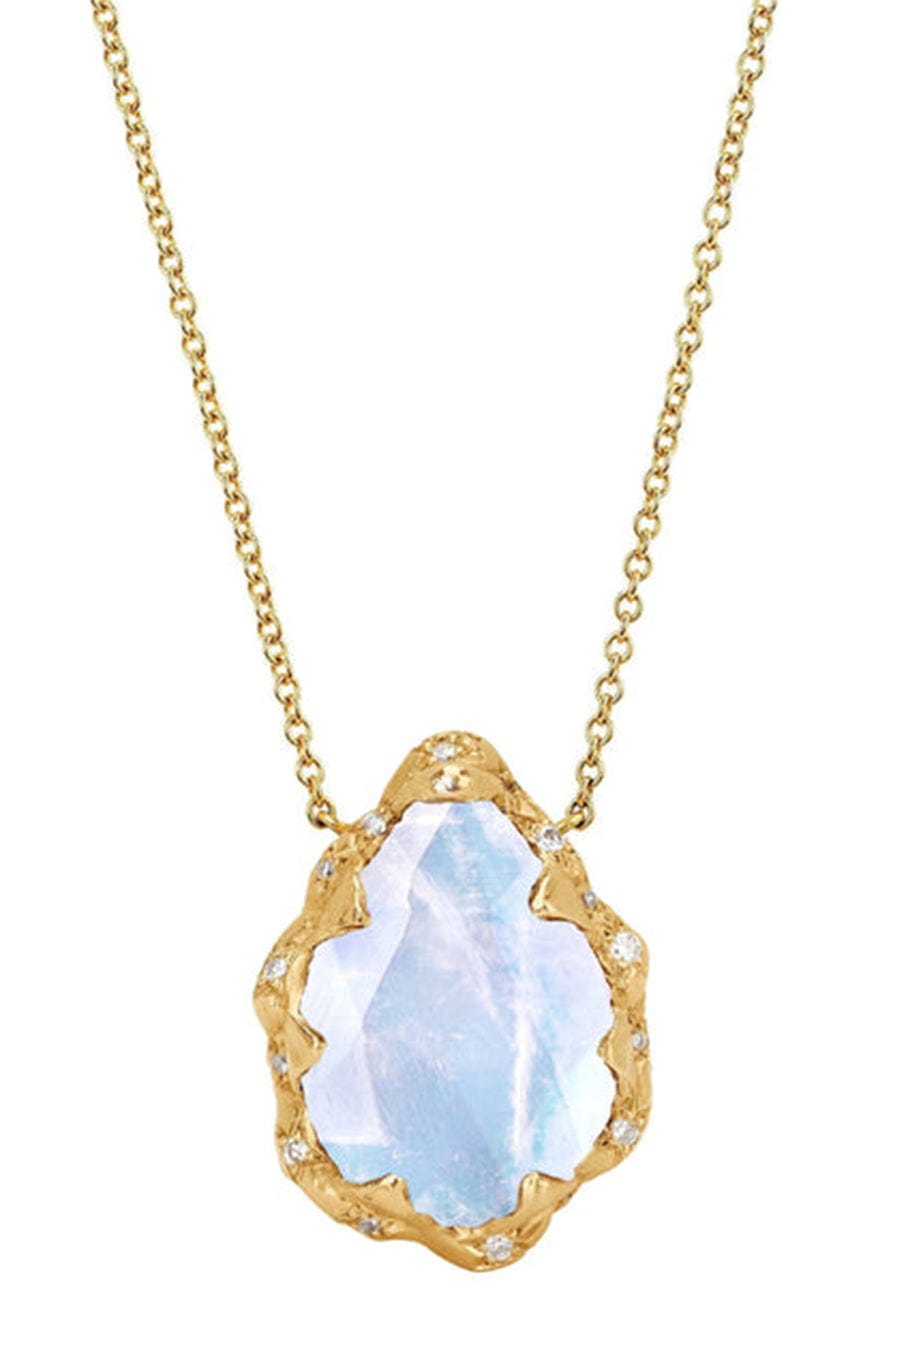 LOGAN HOLLOWELL-Queen Water Drop Moonstone Necklace with Sprinkled Diamonds-YELLOW GOLD